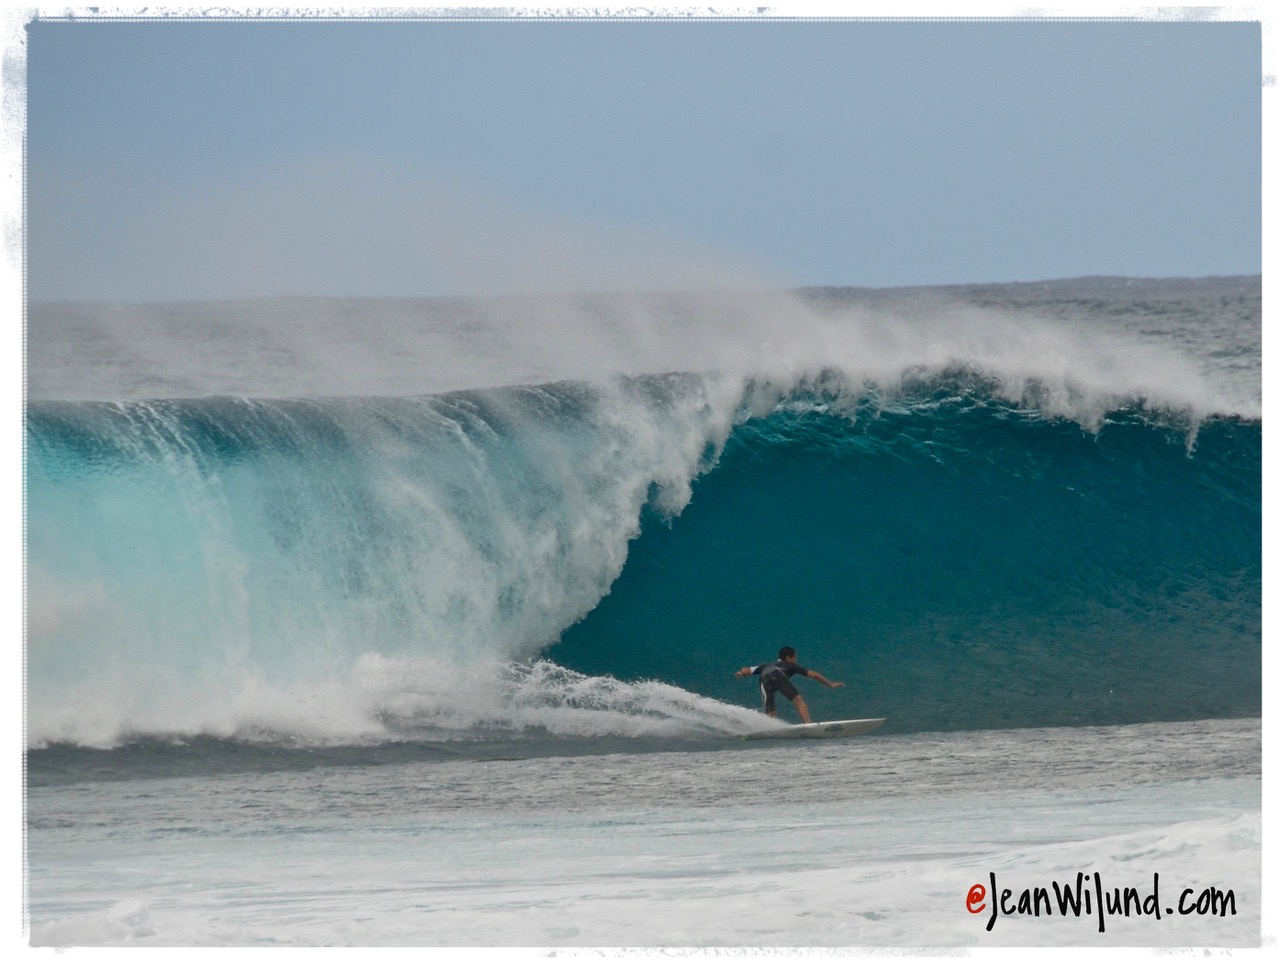 Pipe Master Surfer -- Life Is Either a Daring Adventure Or Nothing At All ~ Take It On! via www.jeanwilund.com